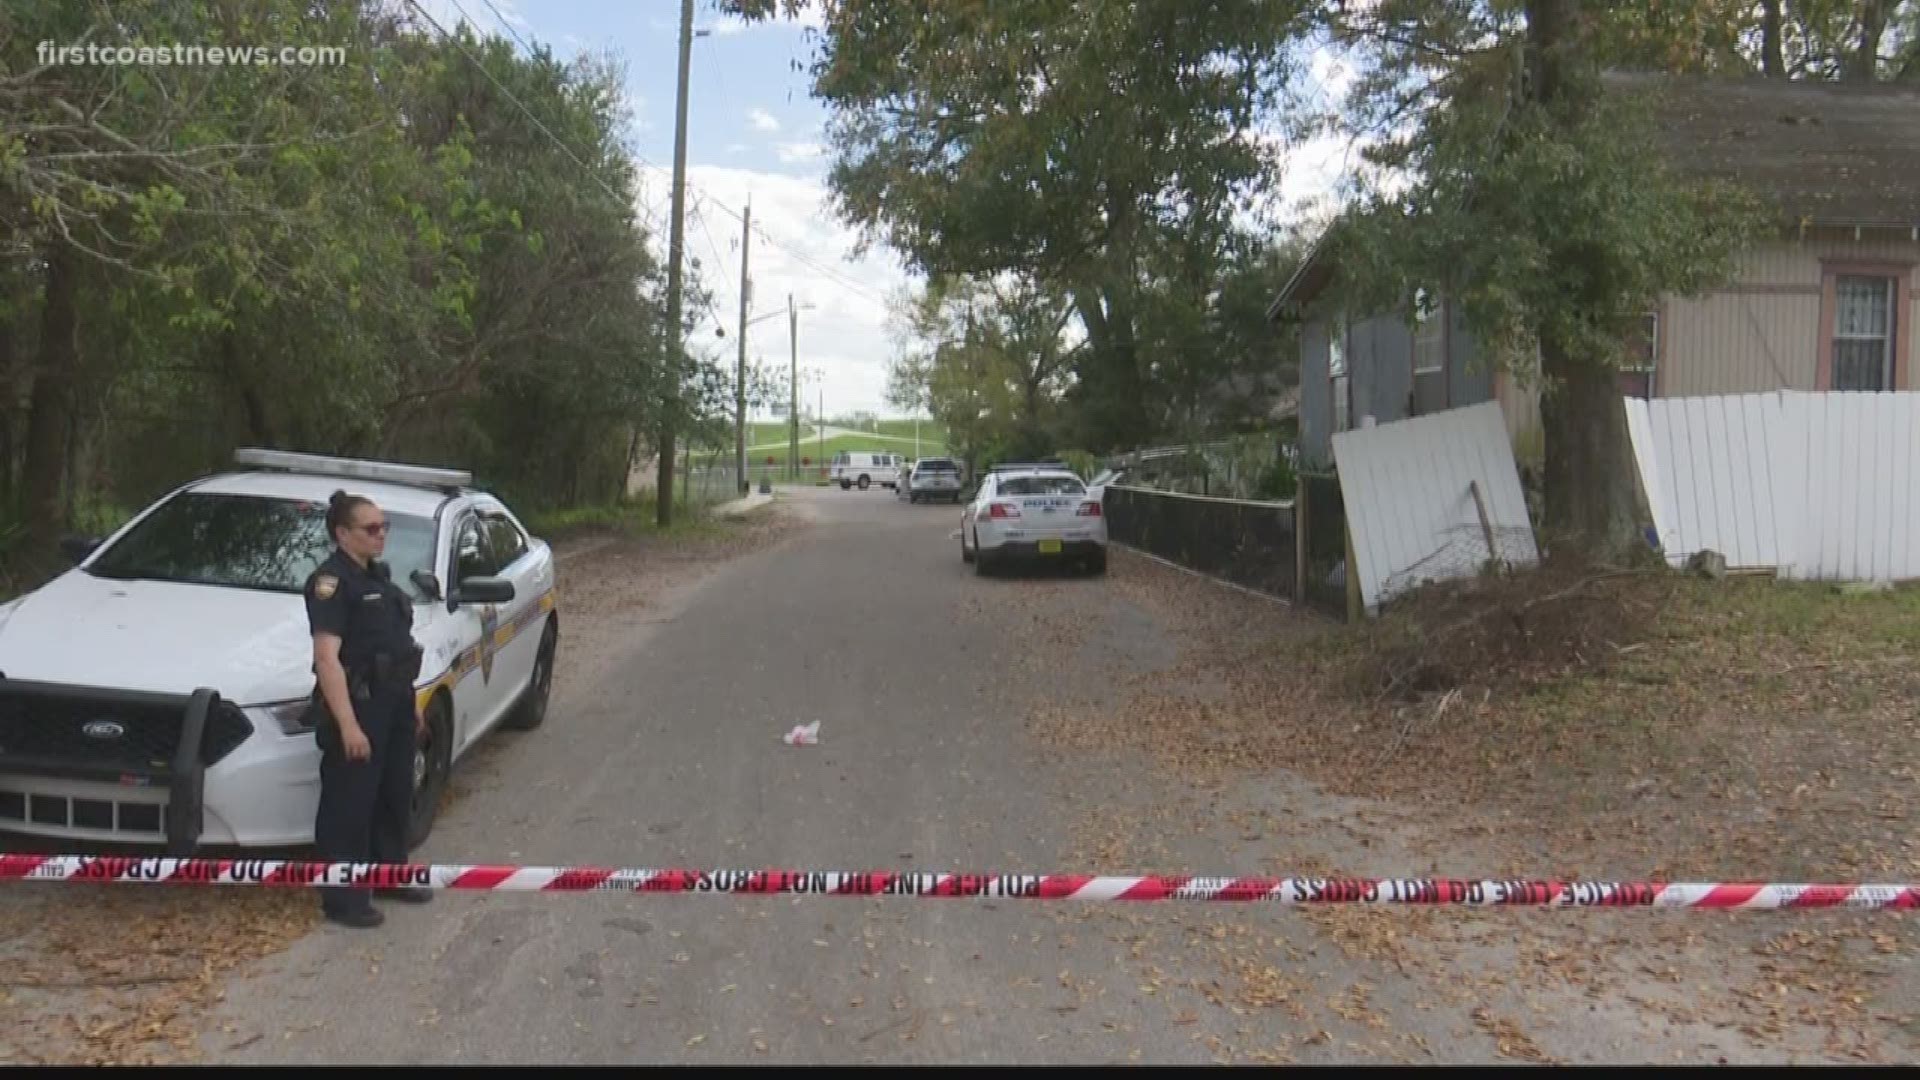 A 16-year-old boy was shot on the Eastside Friday afternoon, according to the Jacksonville Sheriff's Office. He is expected to be OK.